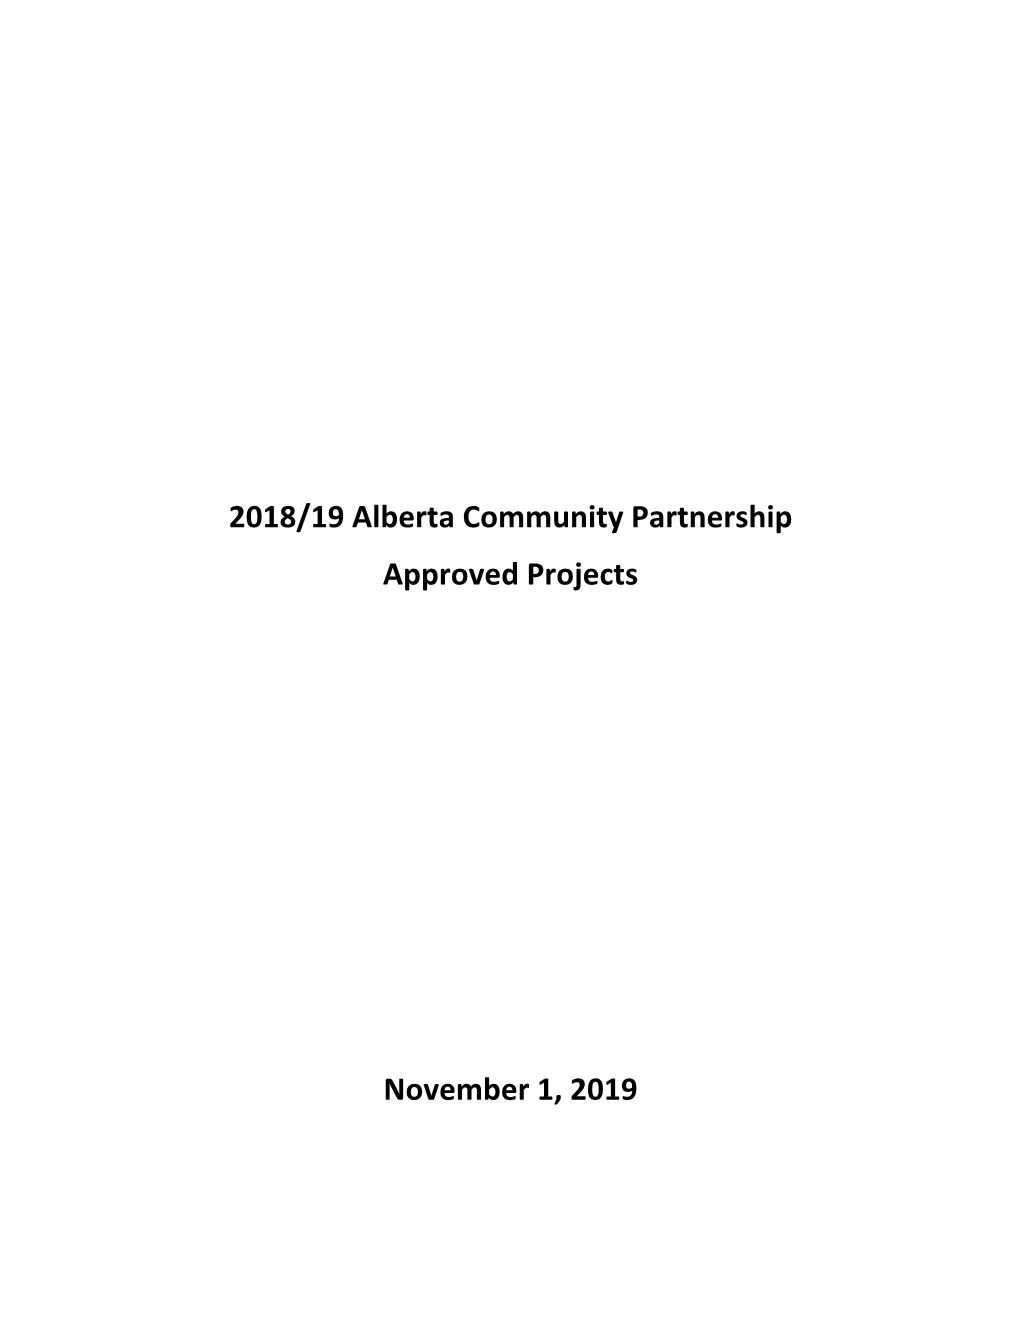 2018/19 Alberta Community Partnership Approved Projects